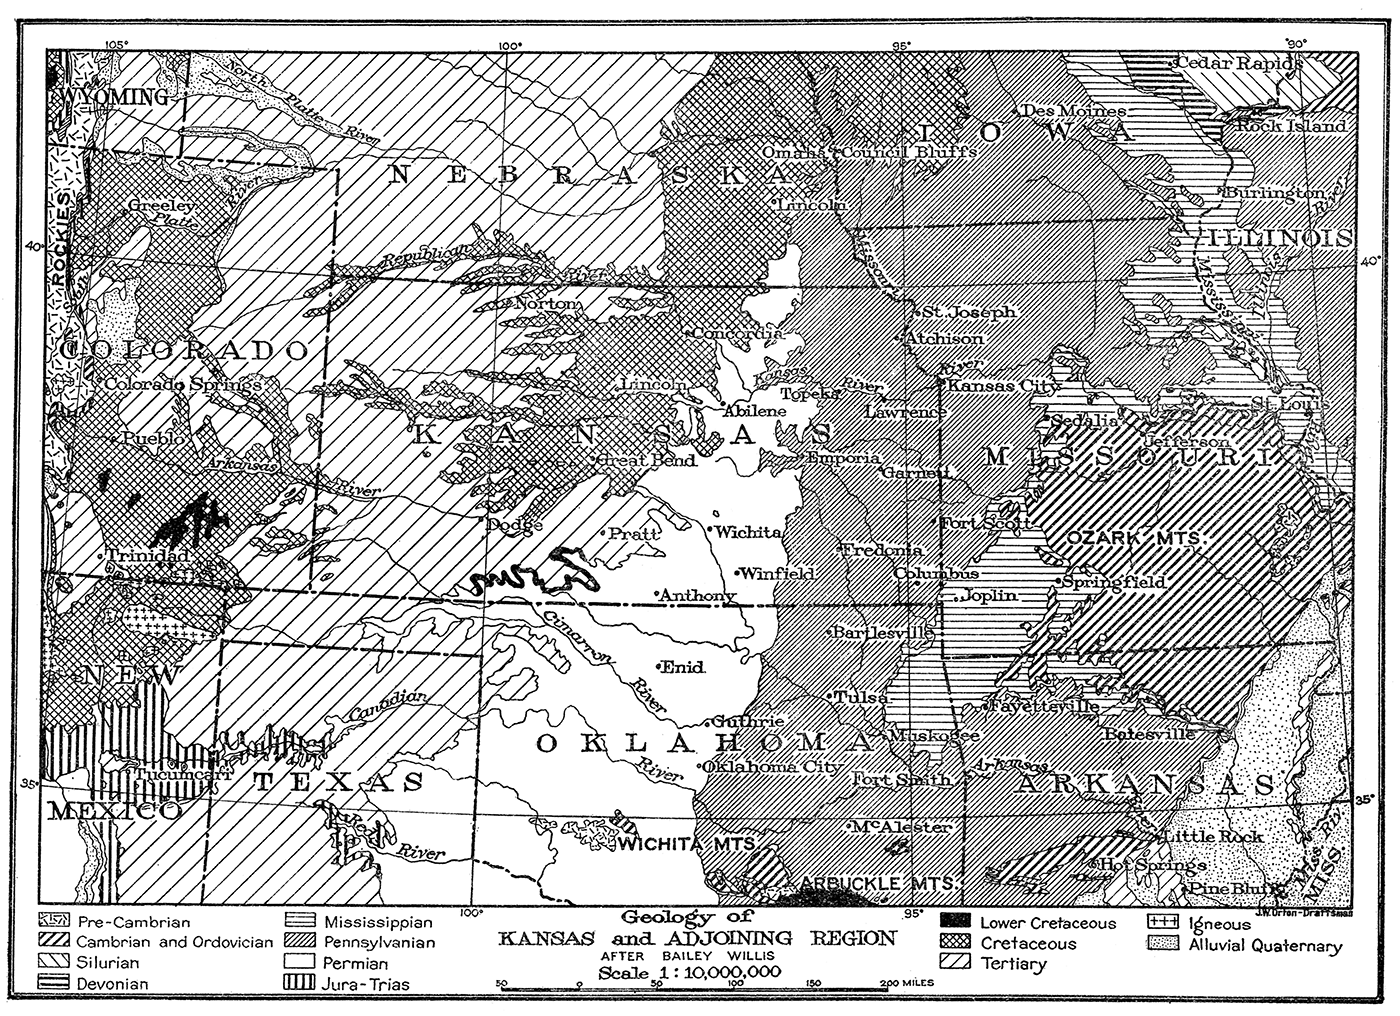 Map showing the geology of Kansas and the adjoining region.